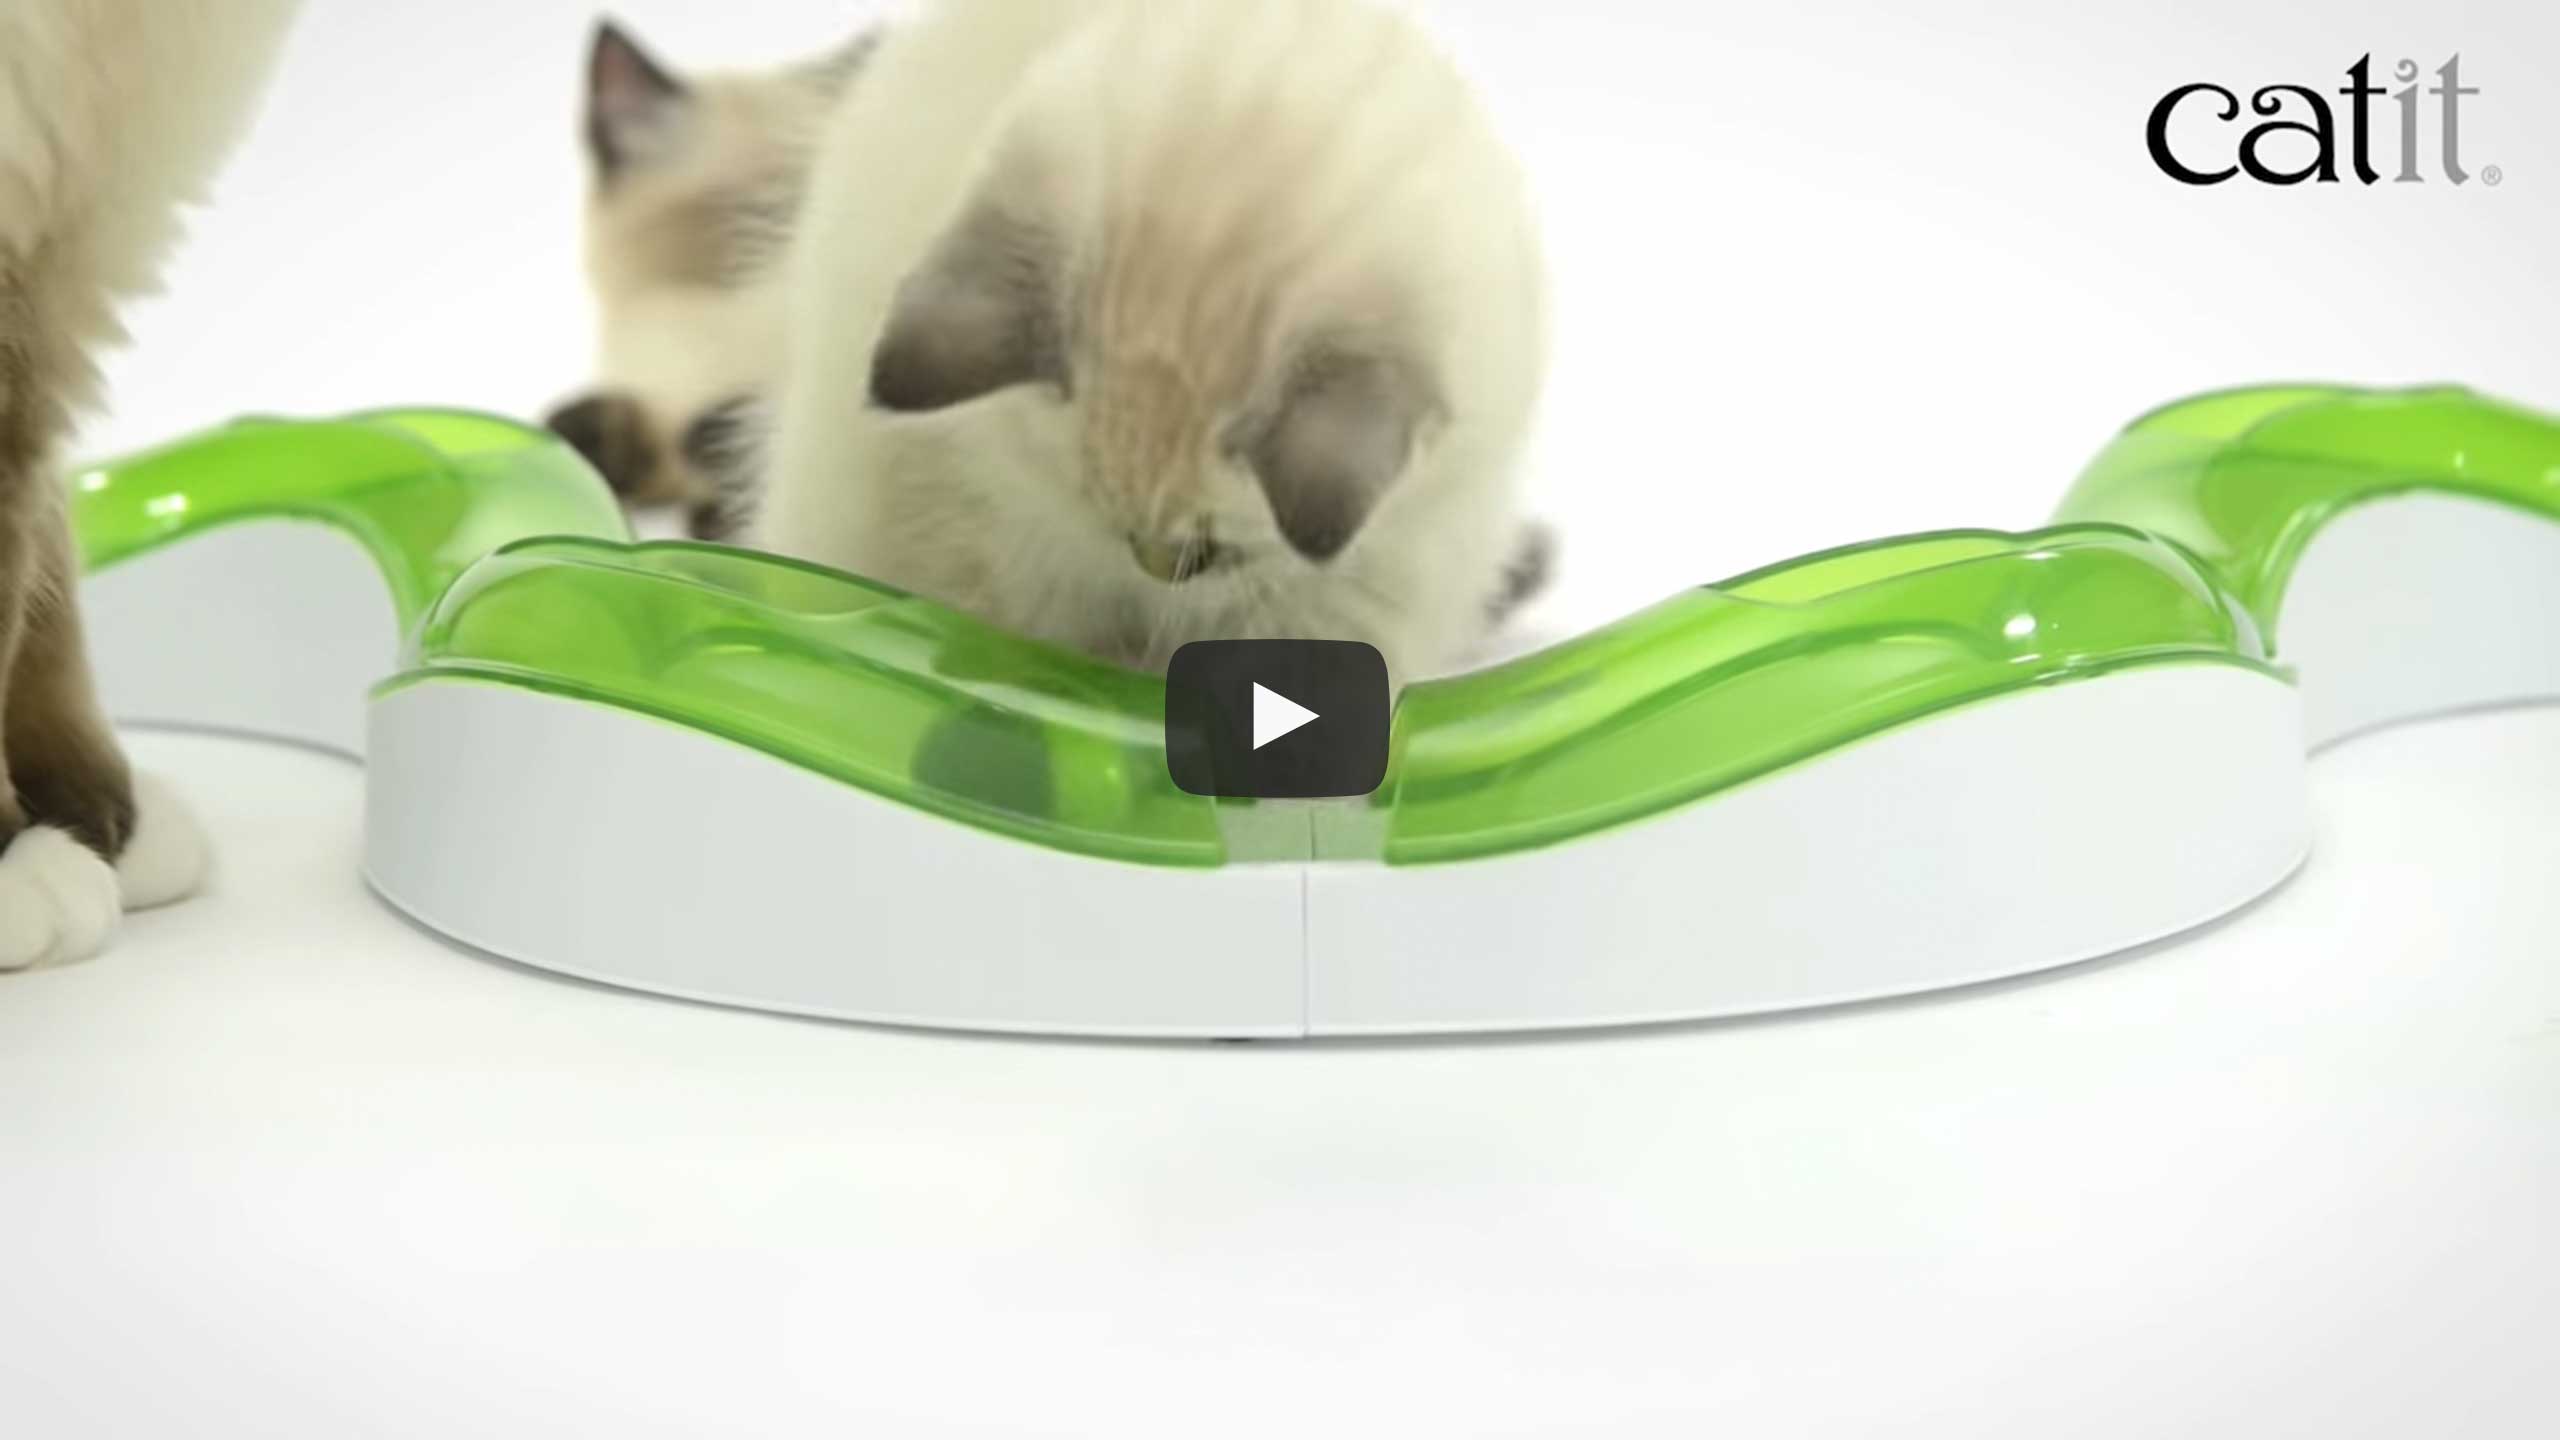 Keeping a kitten entertained with the Catit Circuit Ball Toy